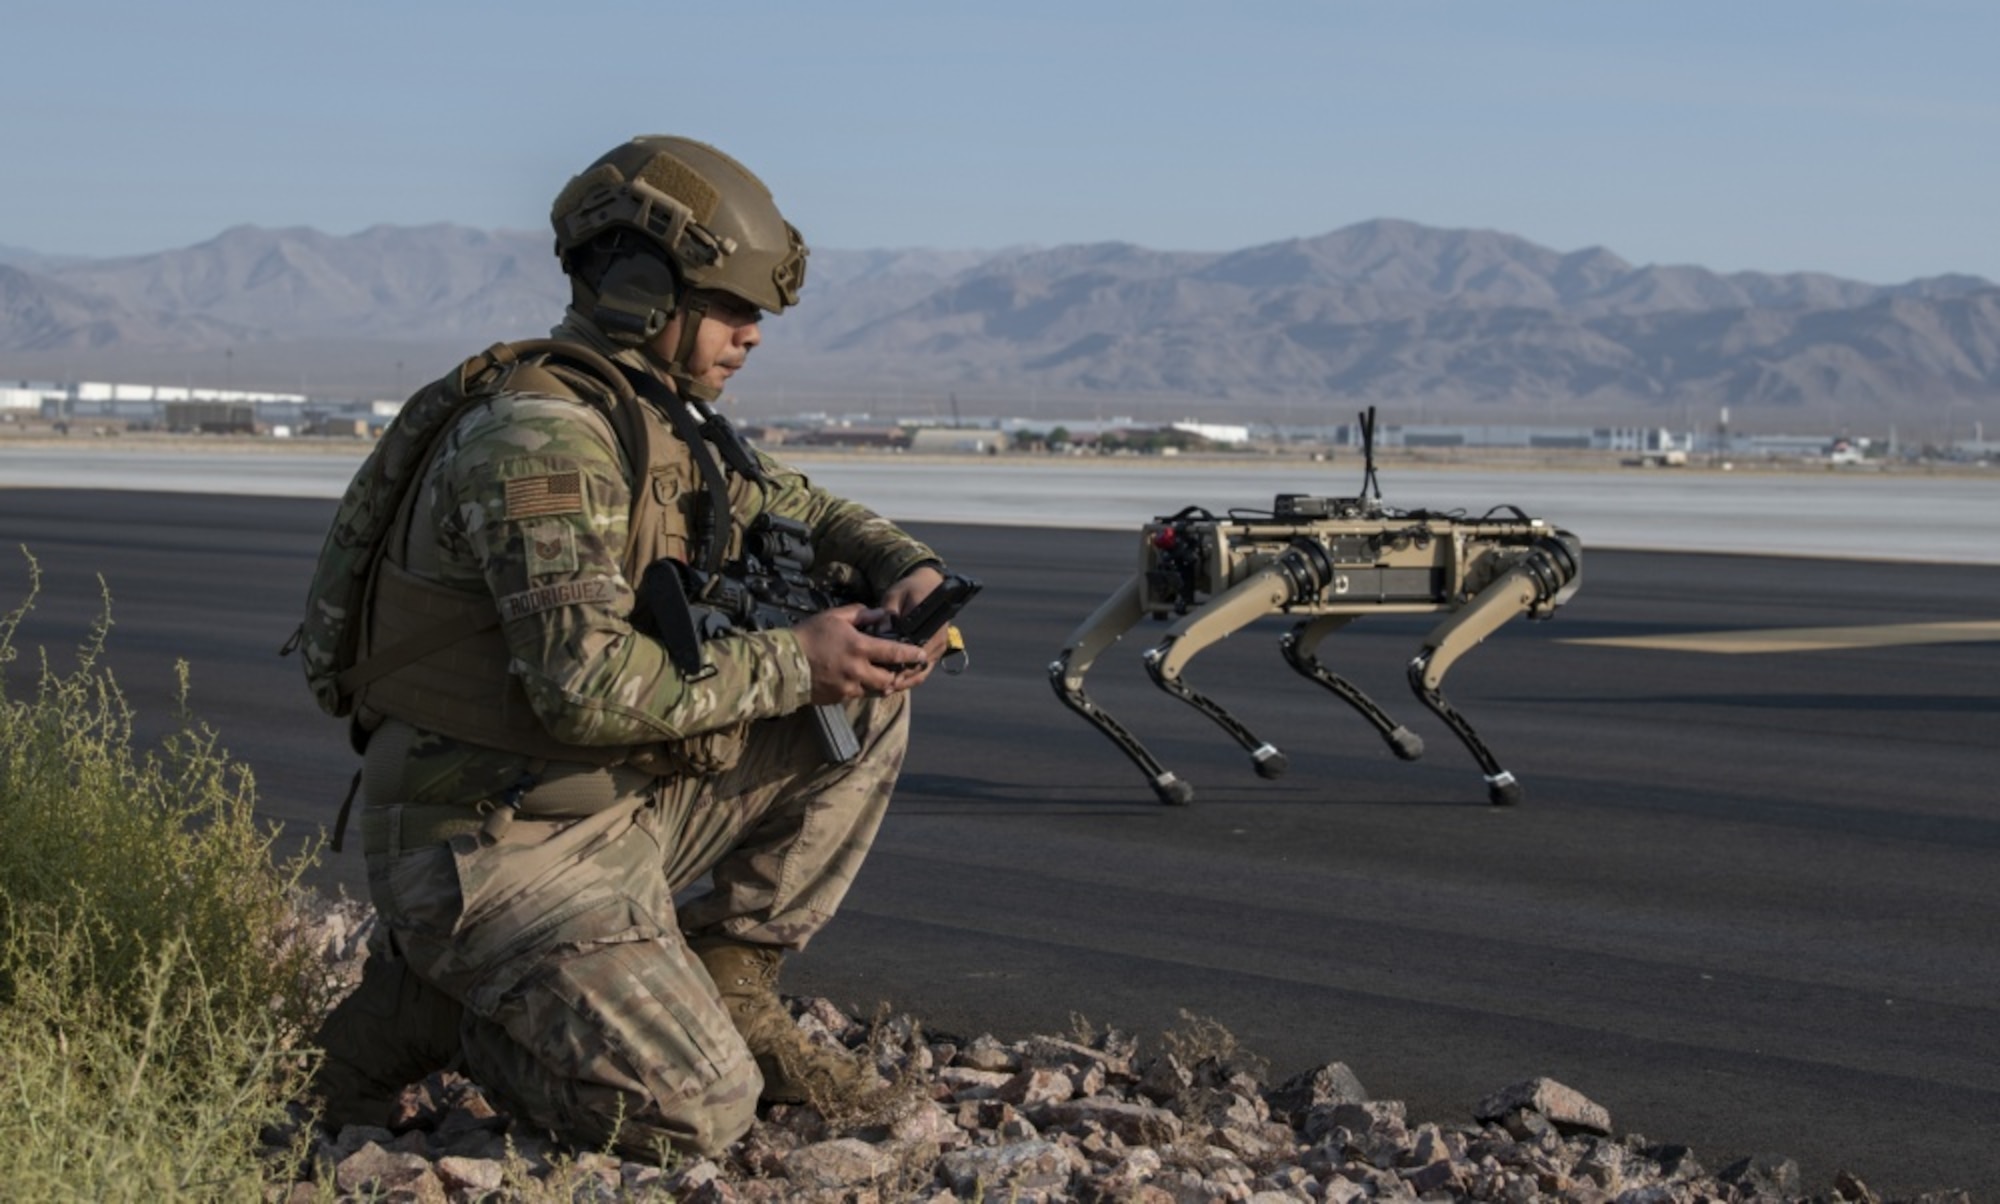 Tech. Sgt. John Rodiguez, 321st Contingency Response Squadron security team, provides operates a Ghost Robotics Vision 60 prototype at a simulated base during the second Advanced Battle Management System On-Ramp exercise at Nellis Air Force Base, Nevada, in Sept. 2020. These ‘dogs’ are semi-autonomous robots equipped with artificial intelligence to (U.S. Air Force photo by Tech. Sgt. Cory D. Payne)